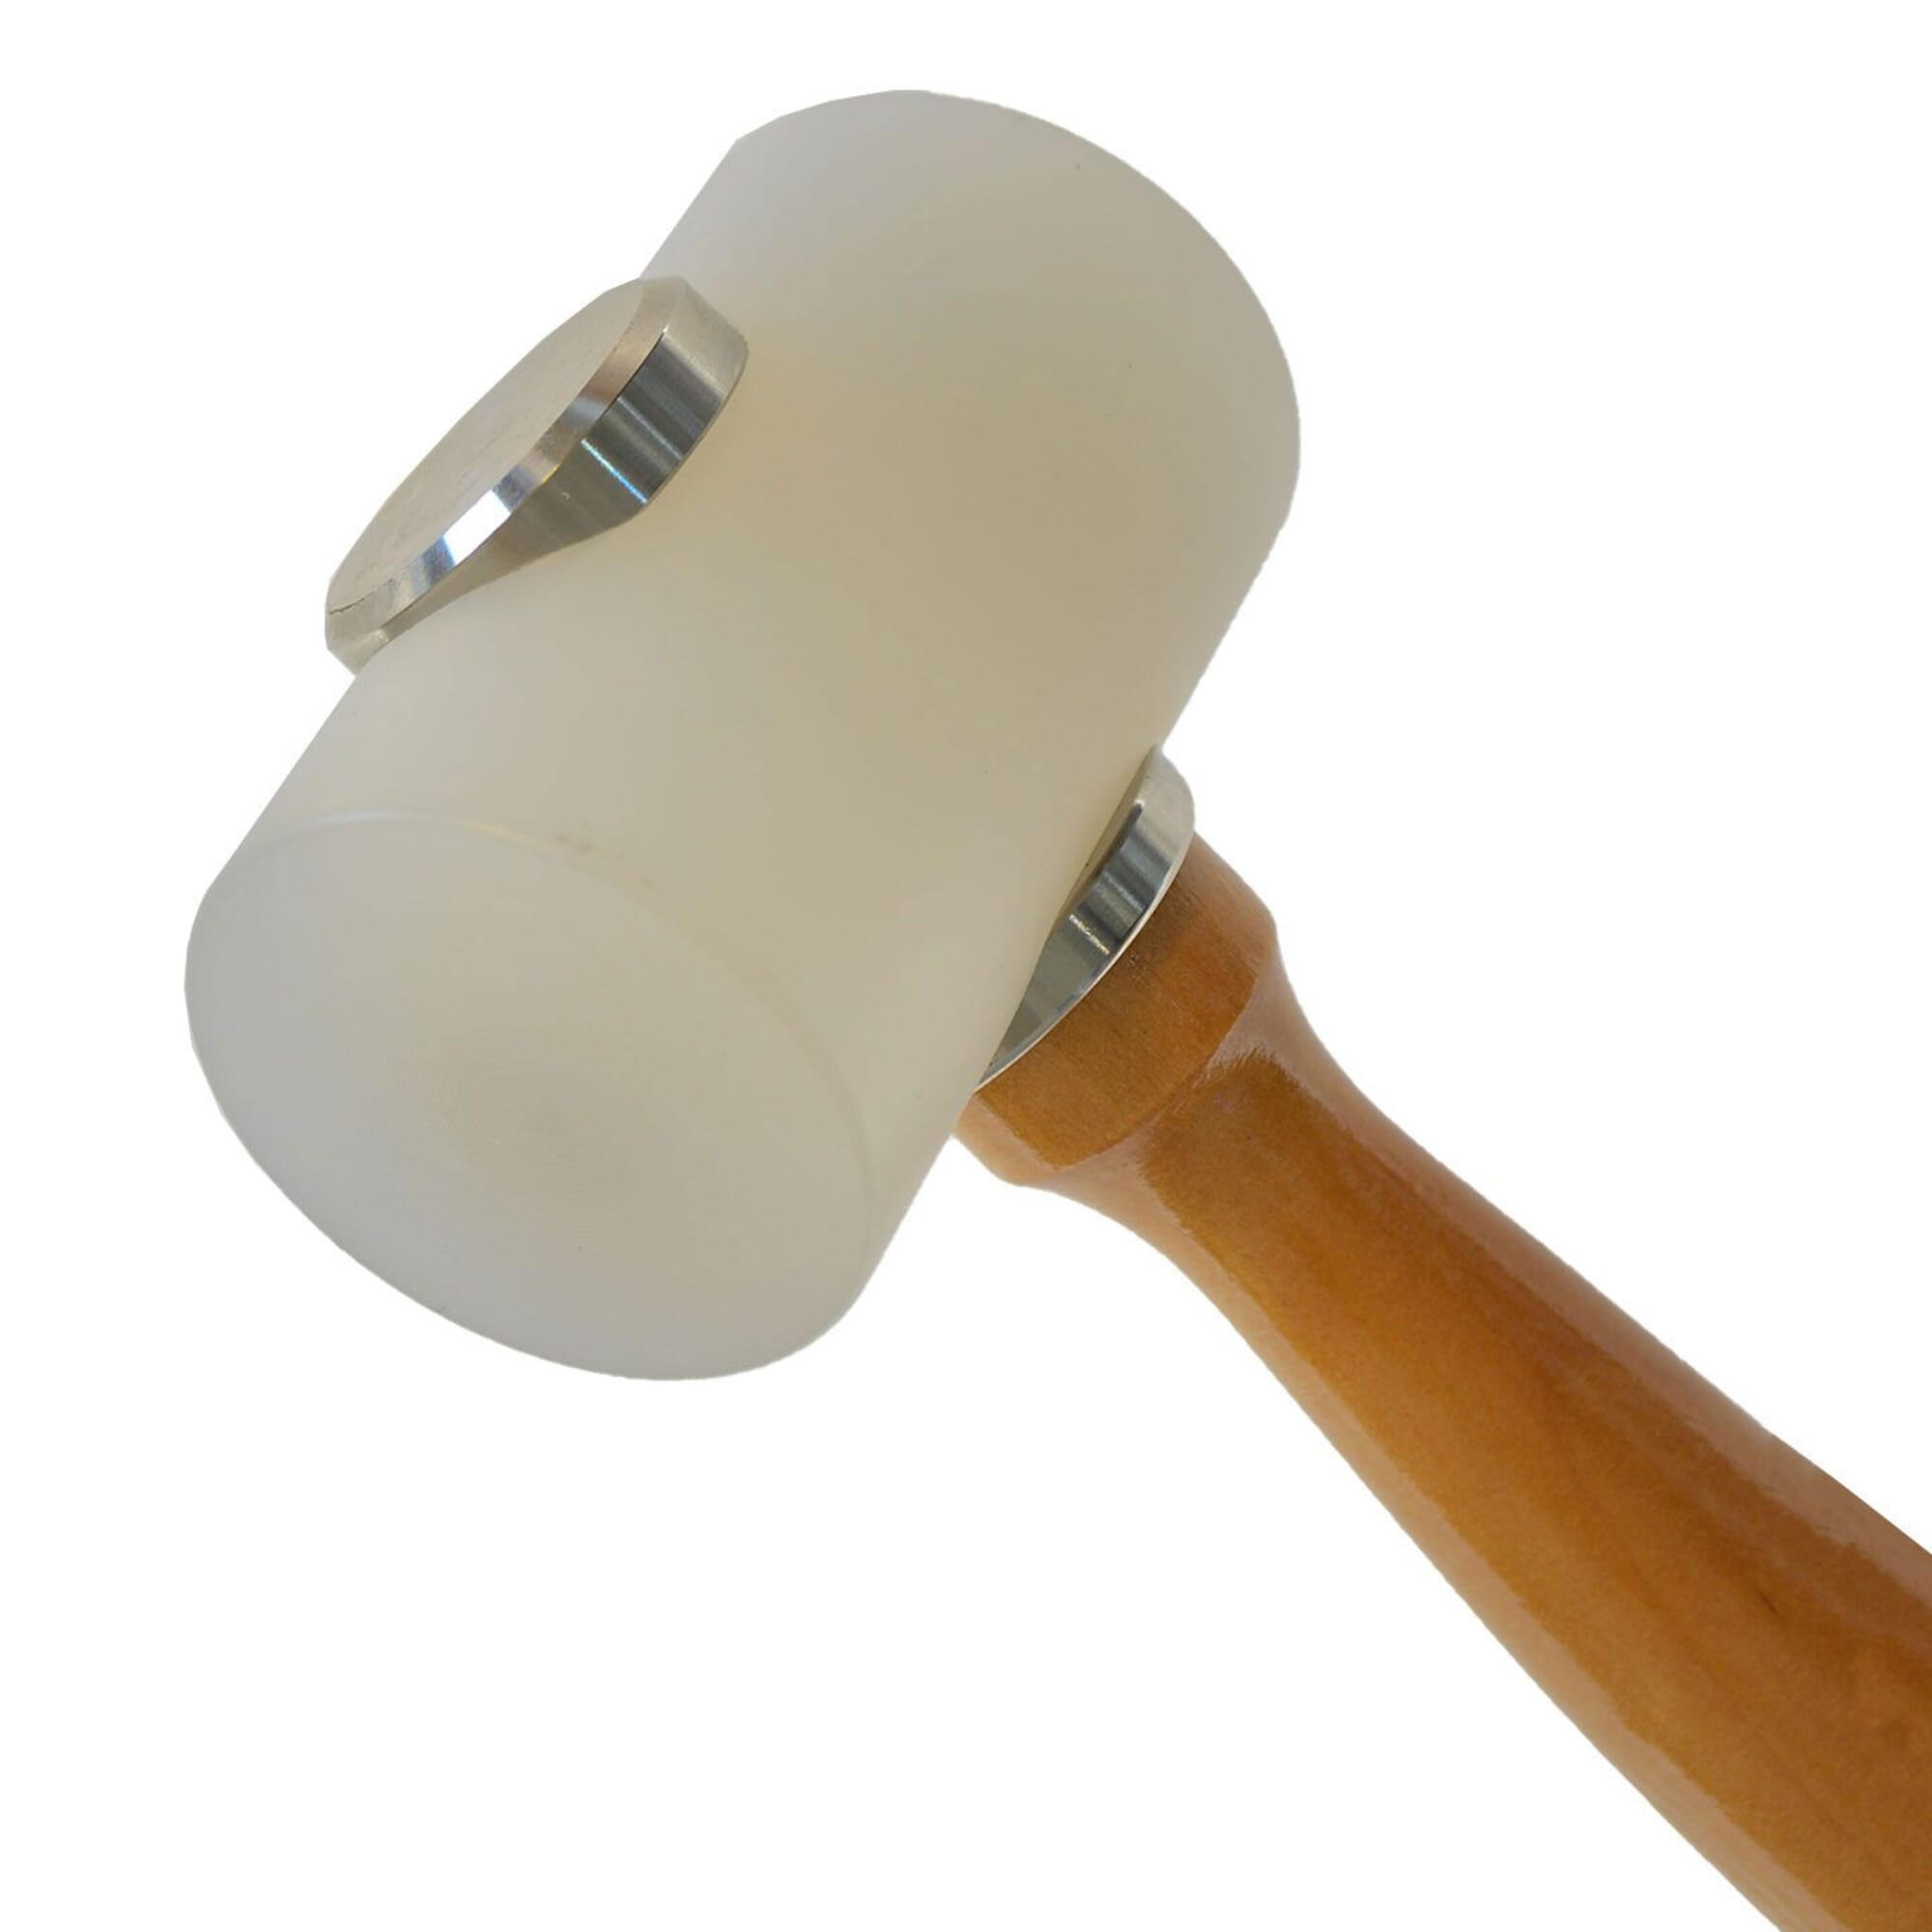 Leathercraft Mallet Tool Light Brown Nylon Double Head Hammer Leather Maul,  for Stamping, Carving, and Punching Holes in Leather